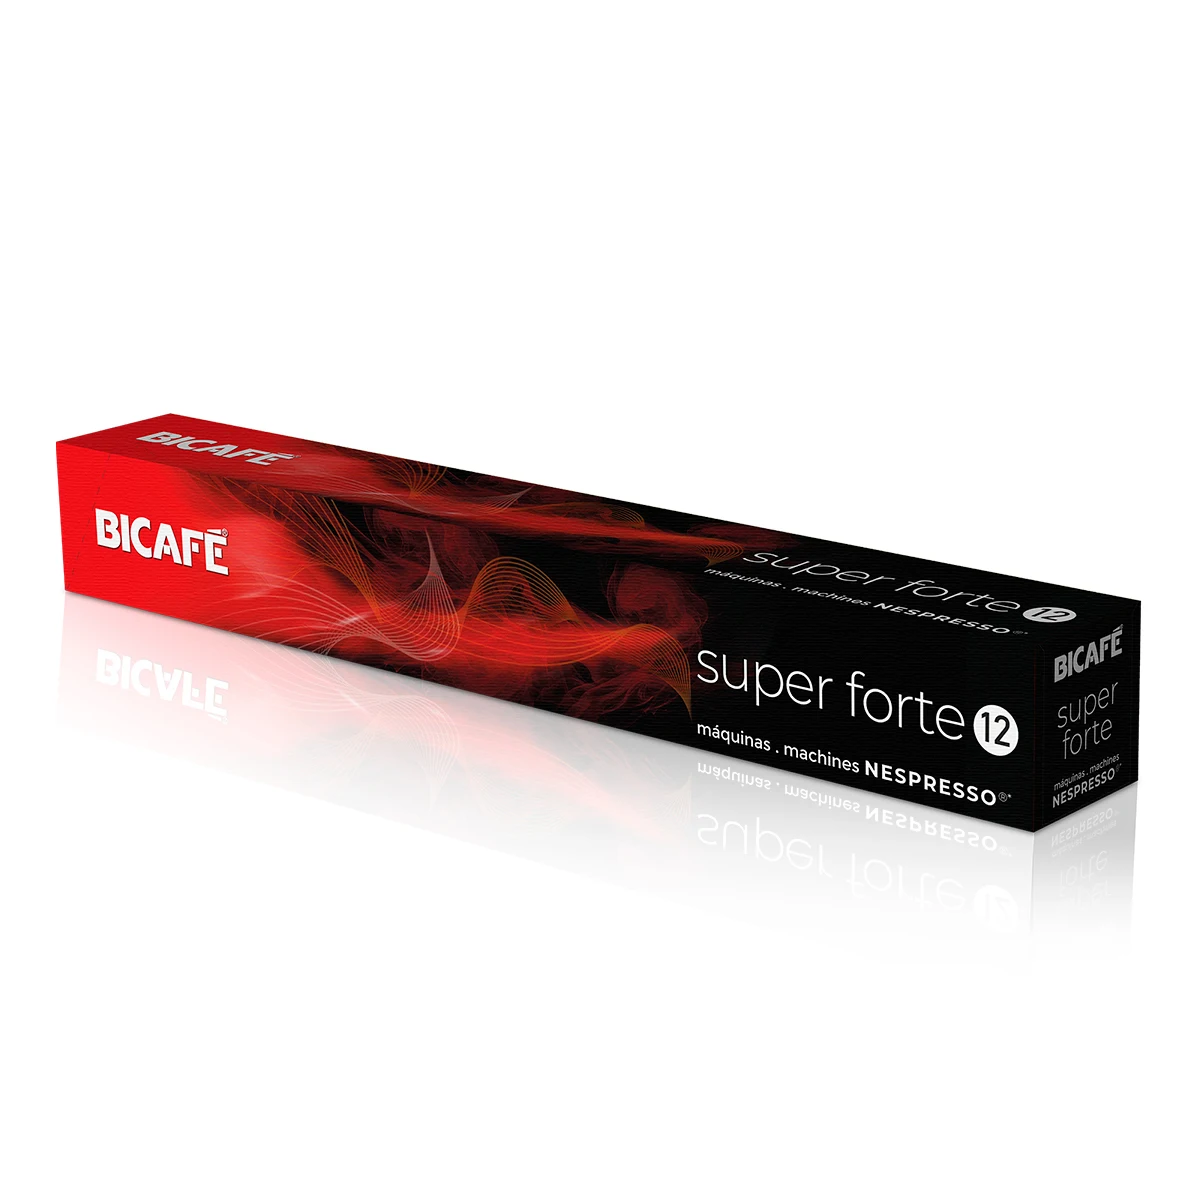 Bicafe SUPER FORTE - 10 Coffee capsules compatibles with most manufacturers